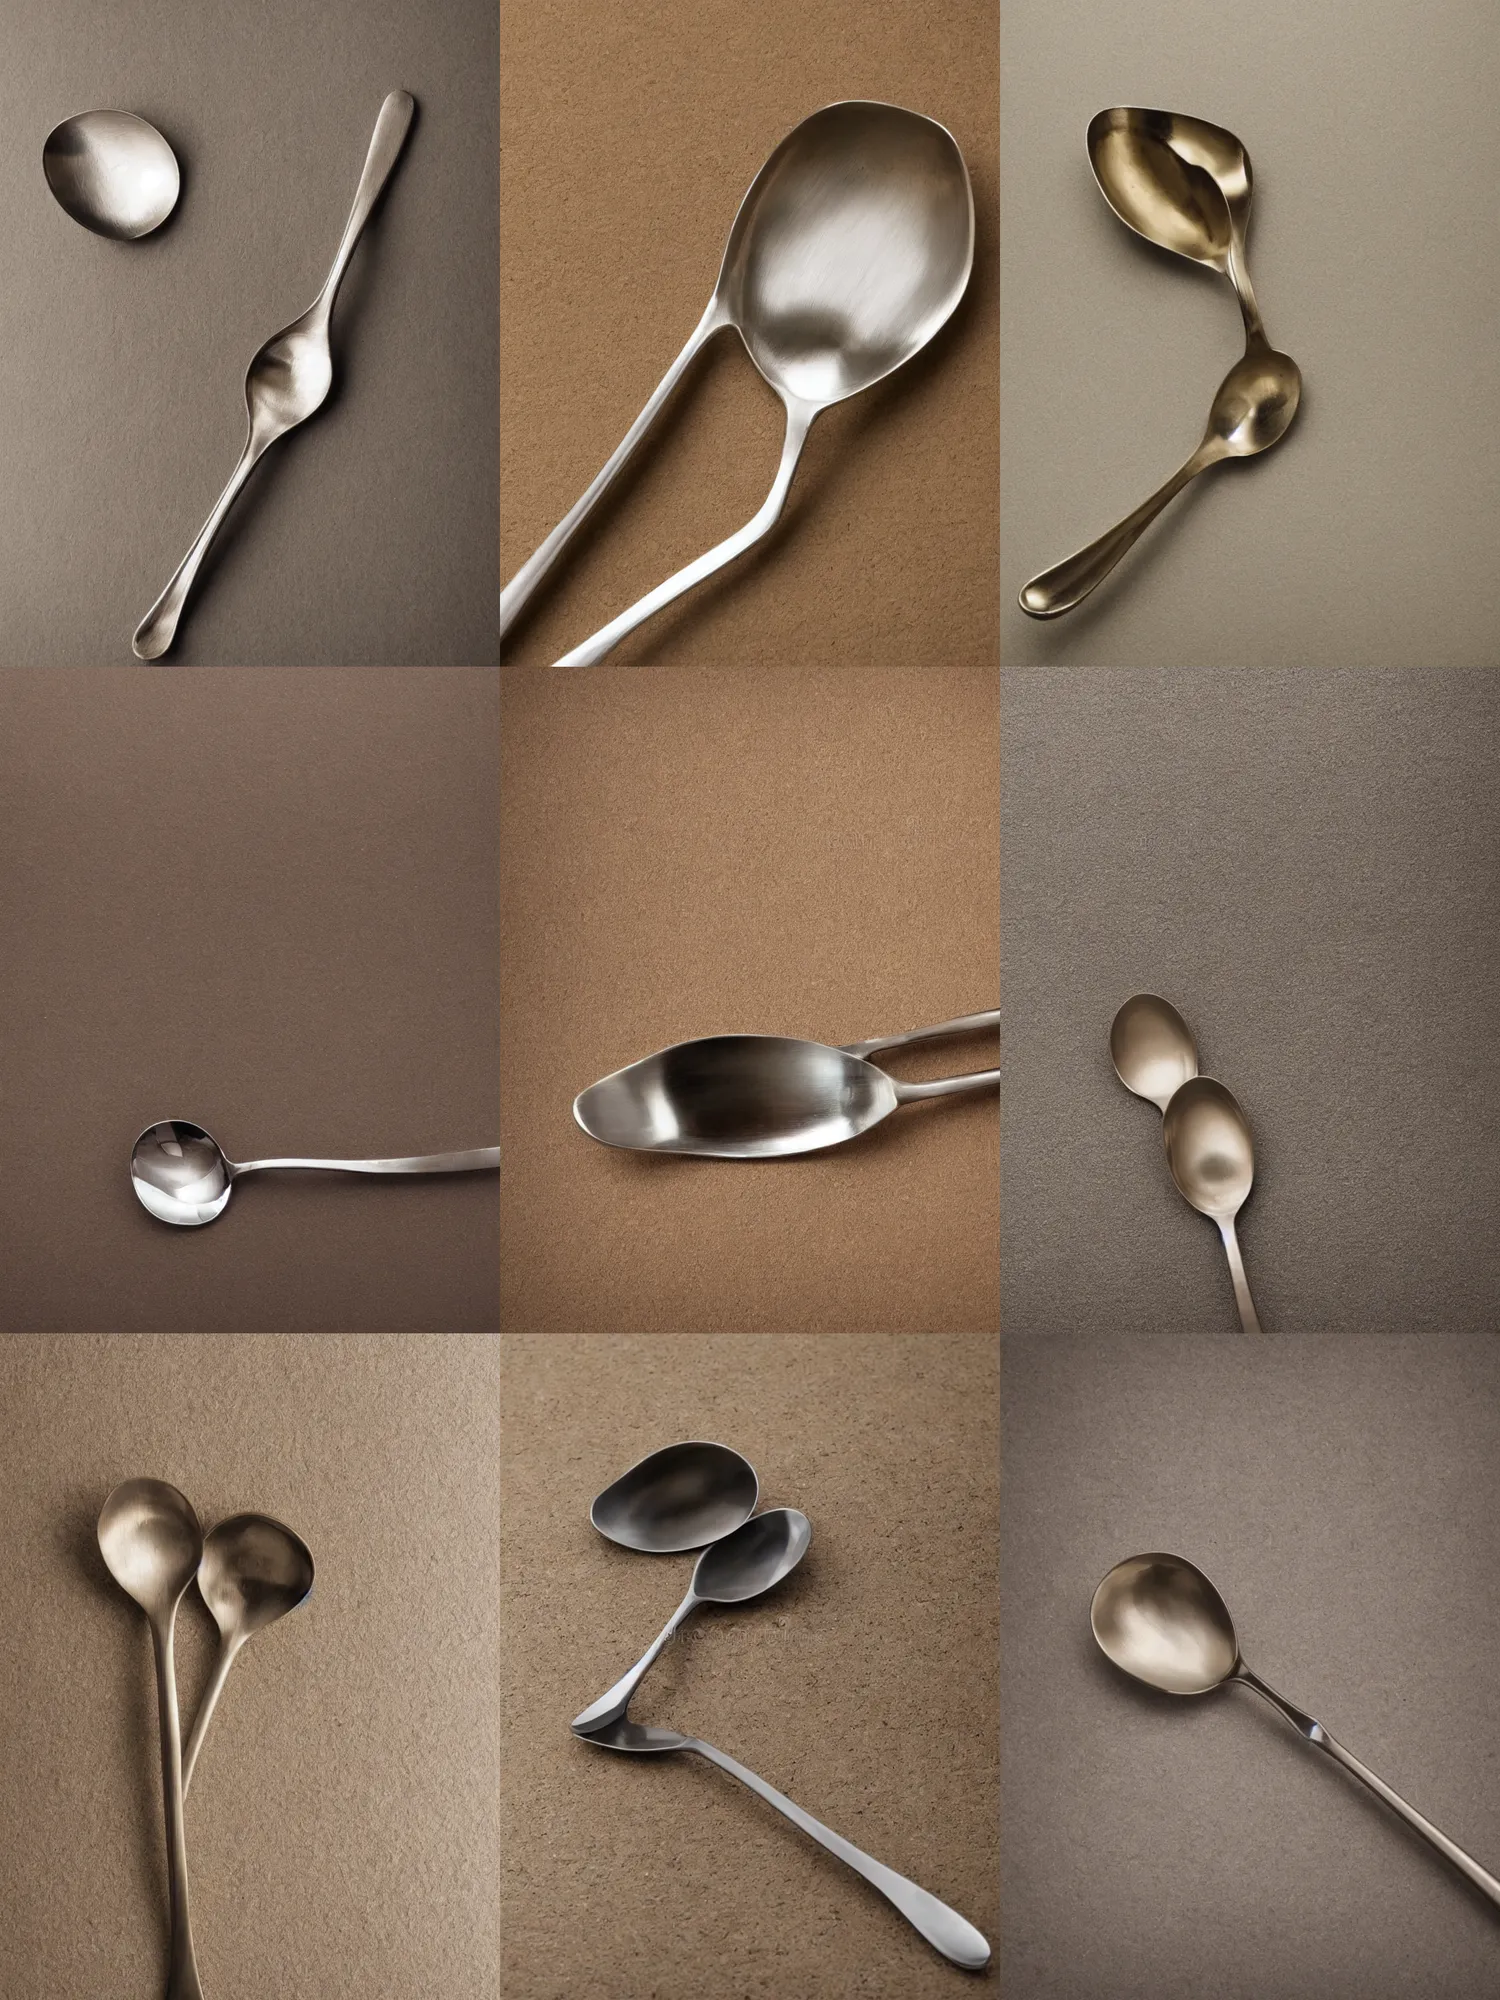 Prompt: framed stock picture of single stainless steel spoon, slightly rotated along its major axis, late nineties to early two - thousands, beige to creme background